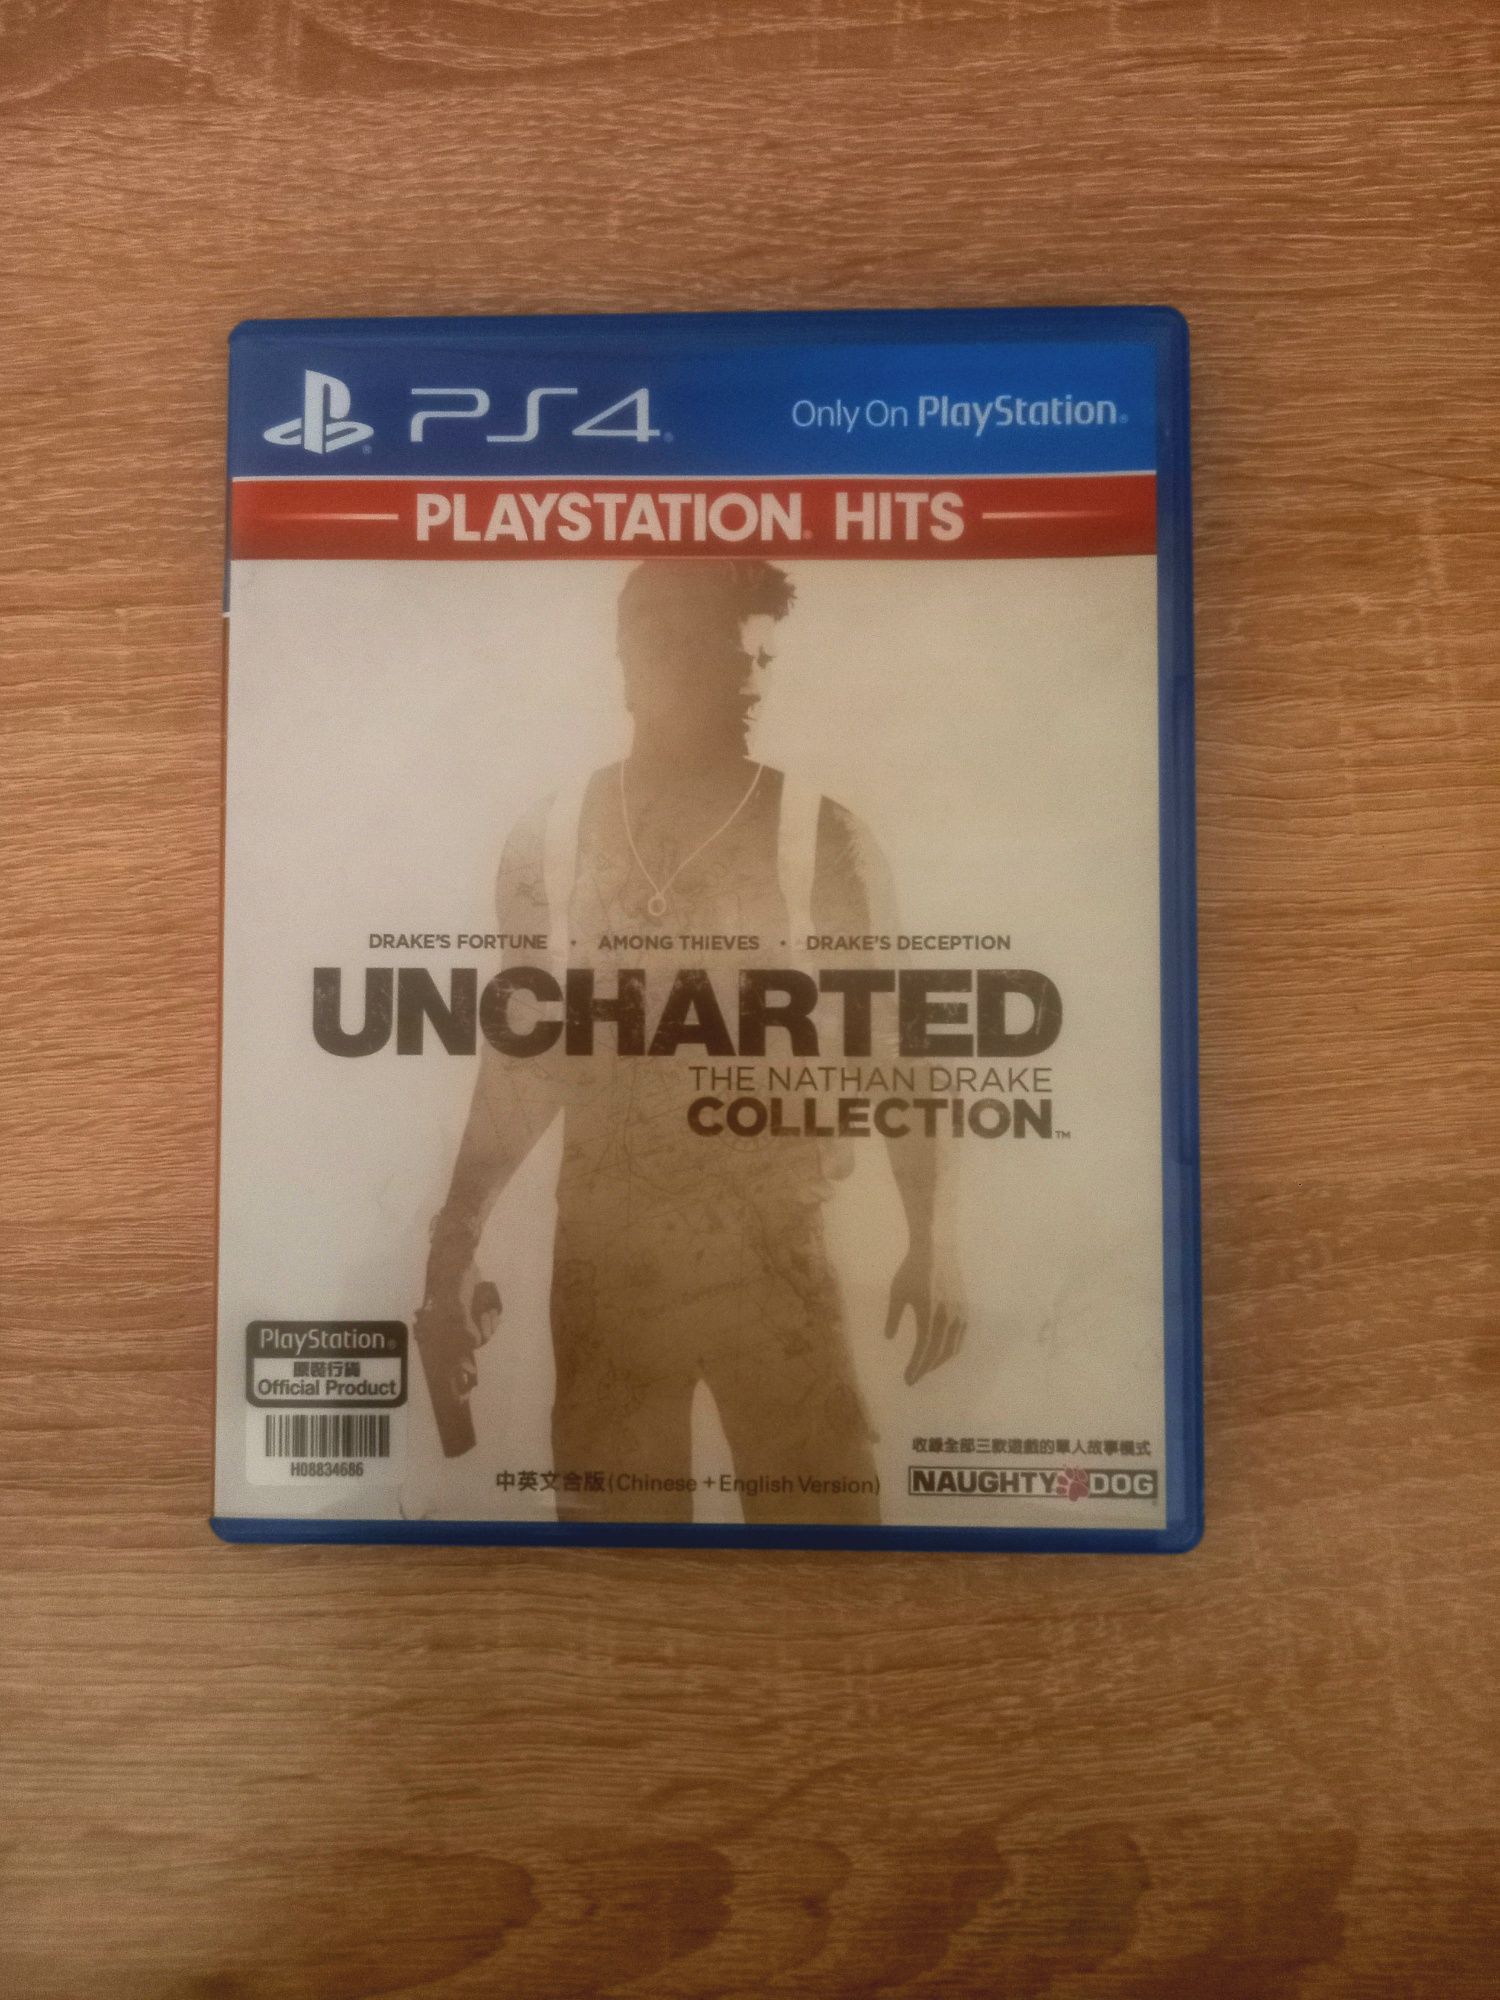 Uncharted collection